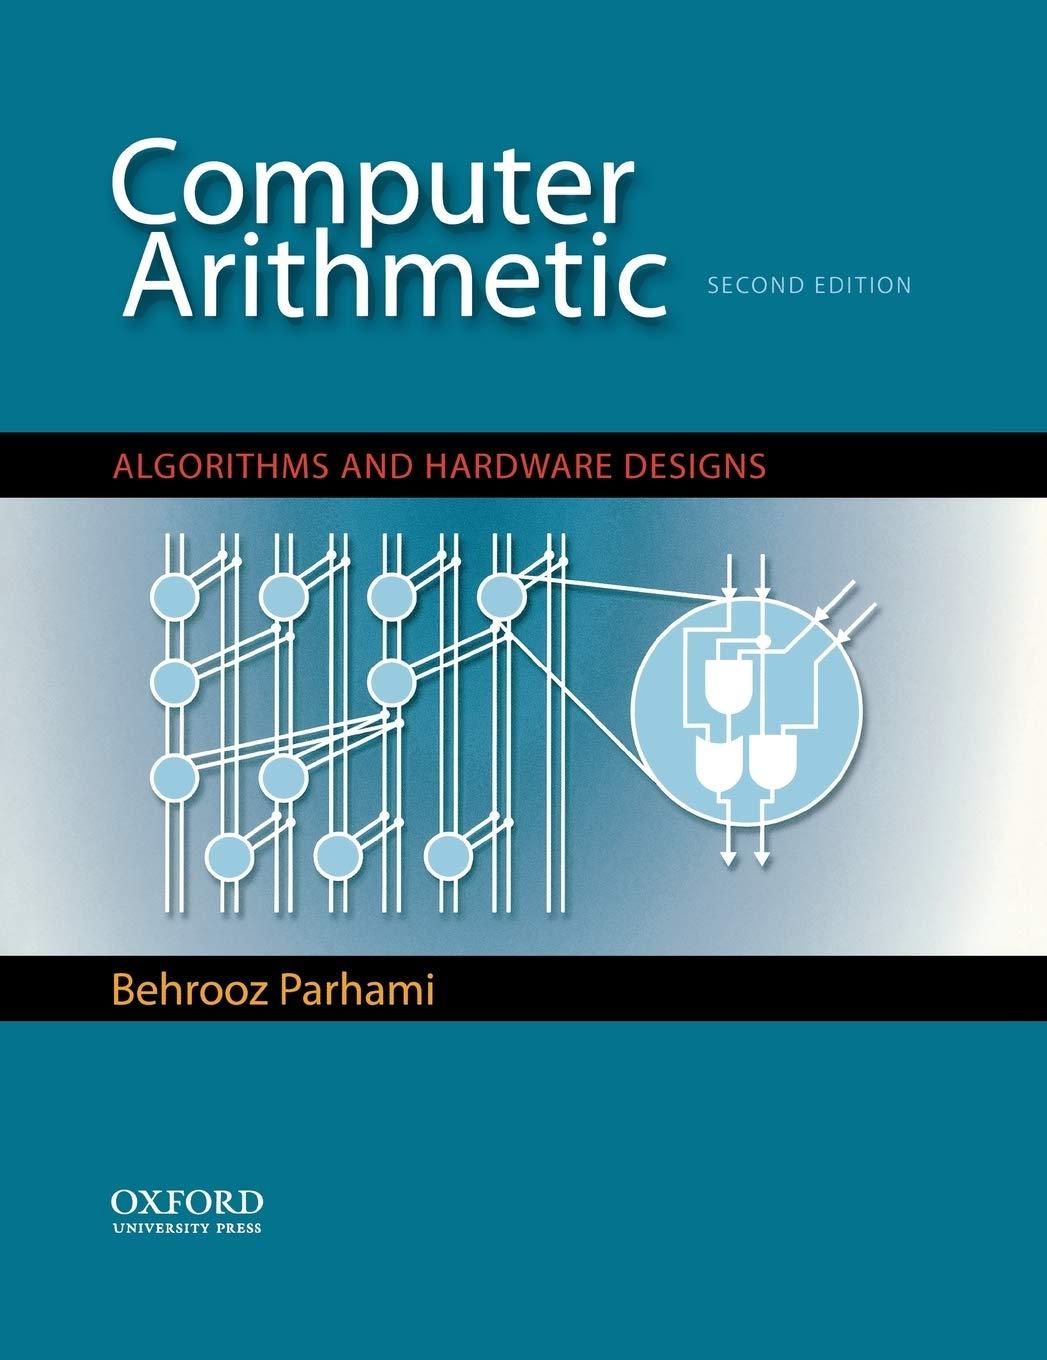 computer arithmetic algorithms and hardware designs 2nd edition behrooz parhami 0195328485, 9780195328486